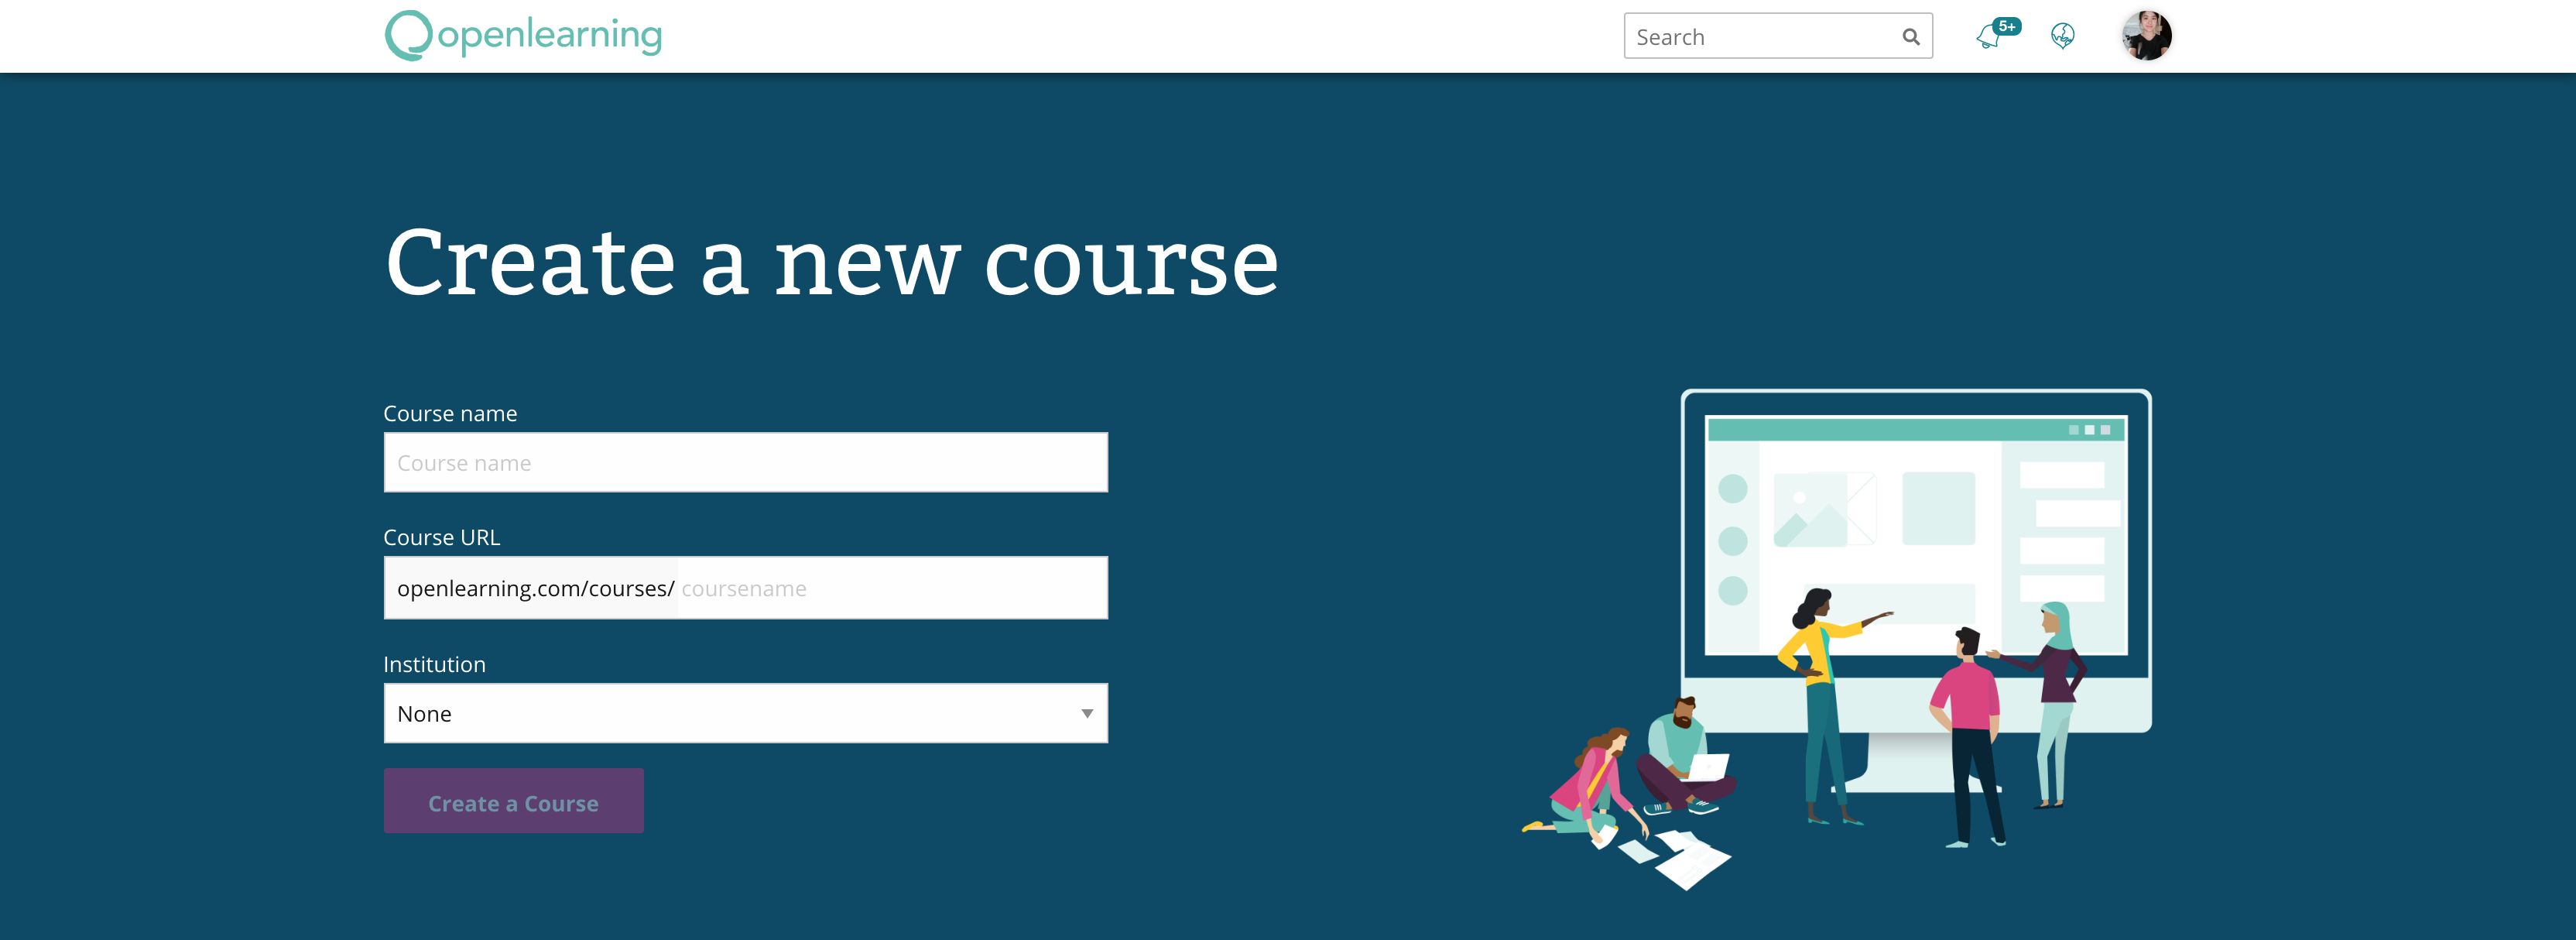 OpenLearning create a course page. It says 'Create a new course' and asks for a course name, course URL and institution.